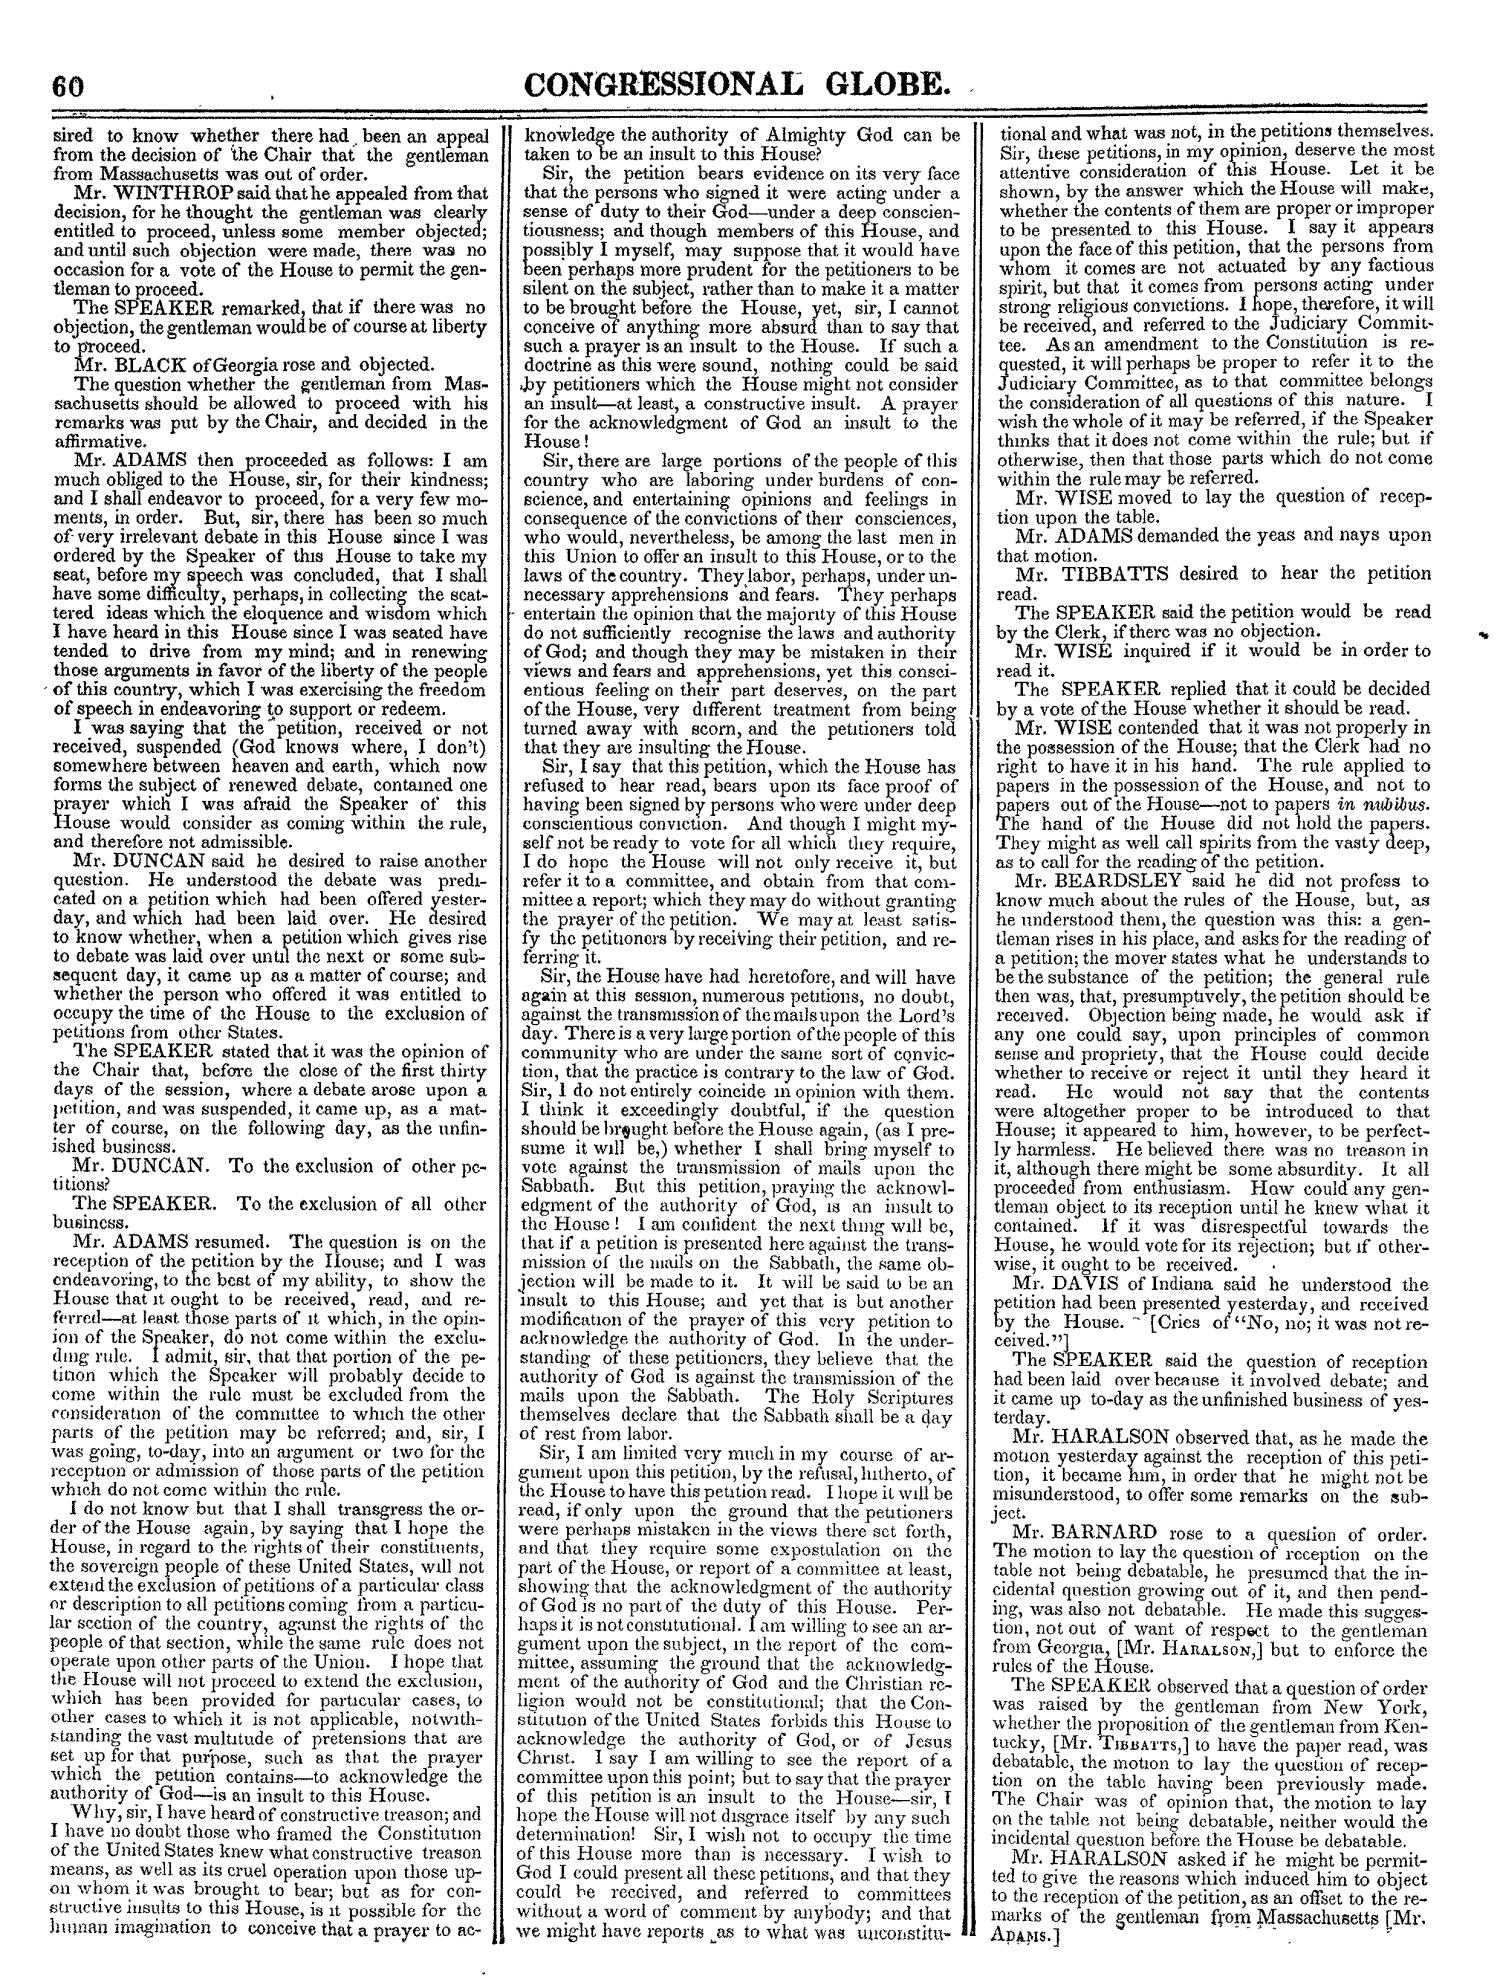 The Congressional Globe, Volume 13, Part 1: Twenty-Eighth Congress, First Session
                                                
                                                    60
                                                